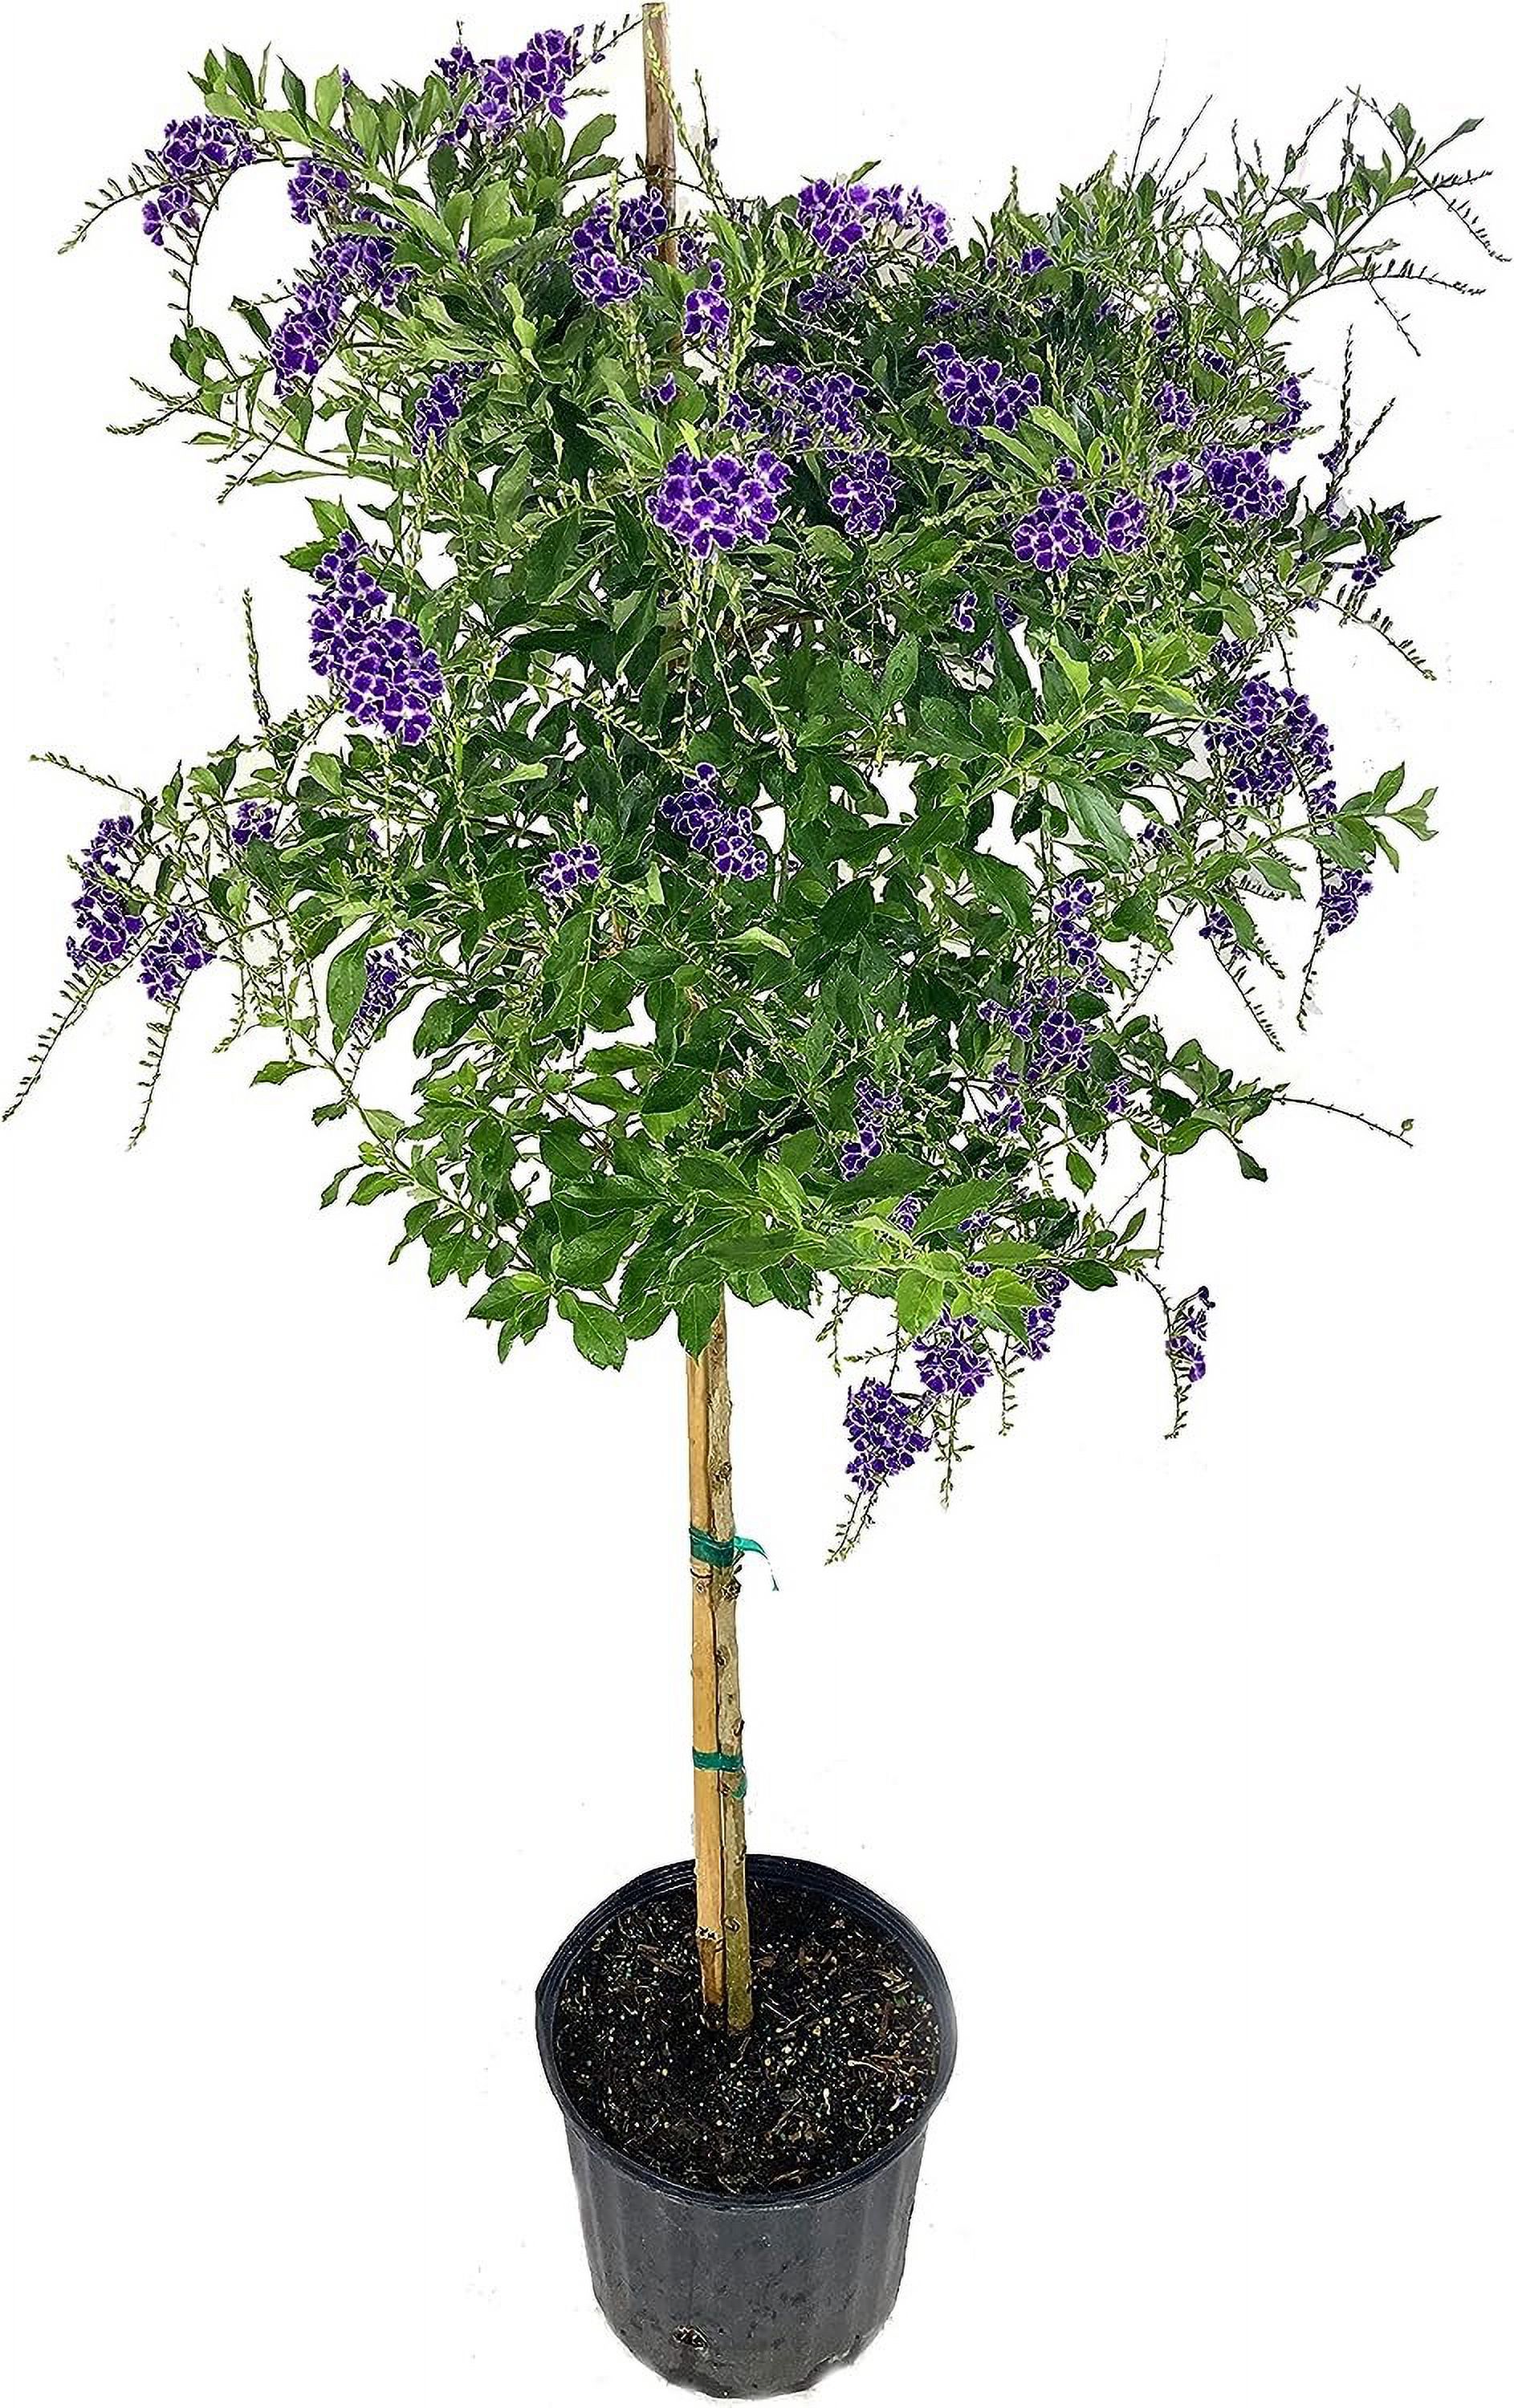 Sapphire Showers Duranta - Live Plant in a 10 Inch Pot - Duranta Erecta "Sapphire Showers" - Beautiful Flowering Butterfly Attracting Patio Plant - image 1 of 6